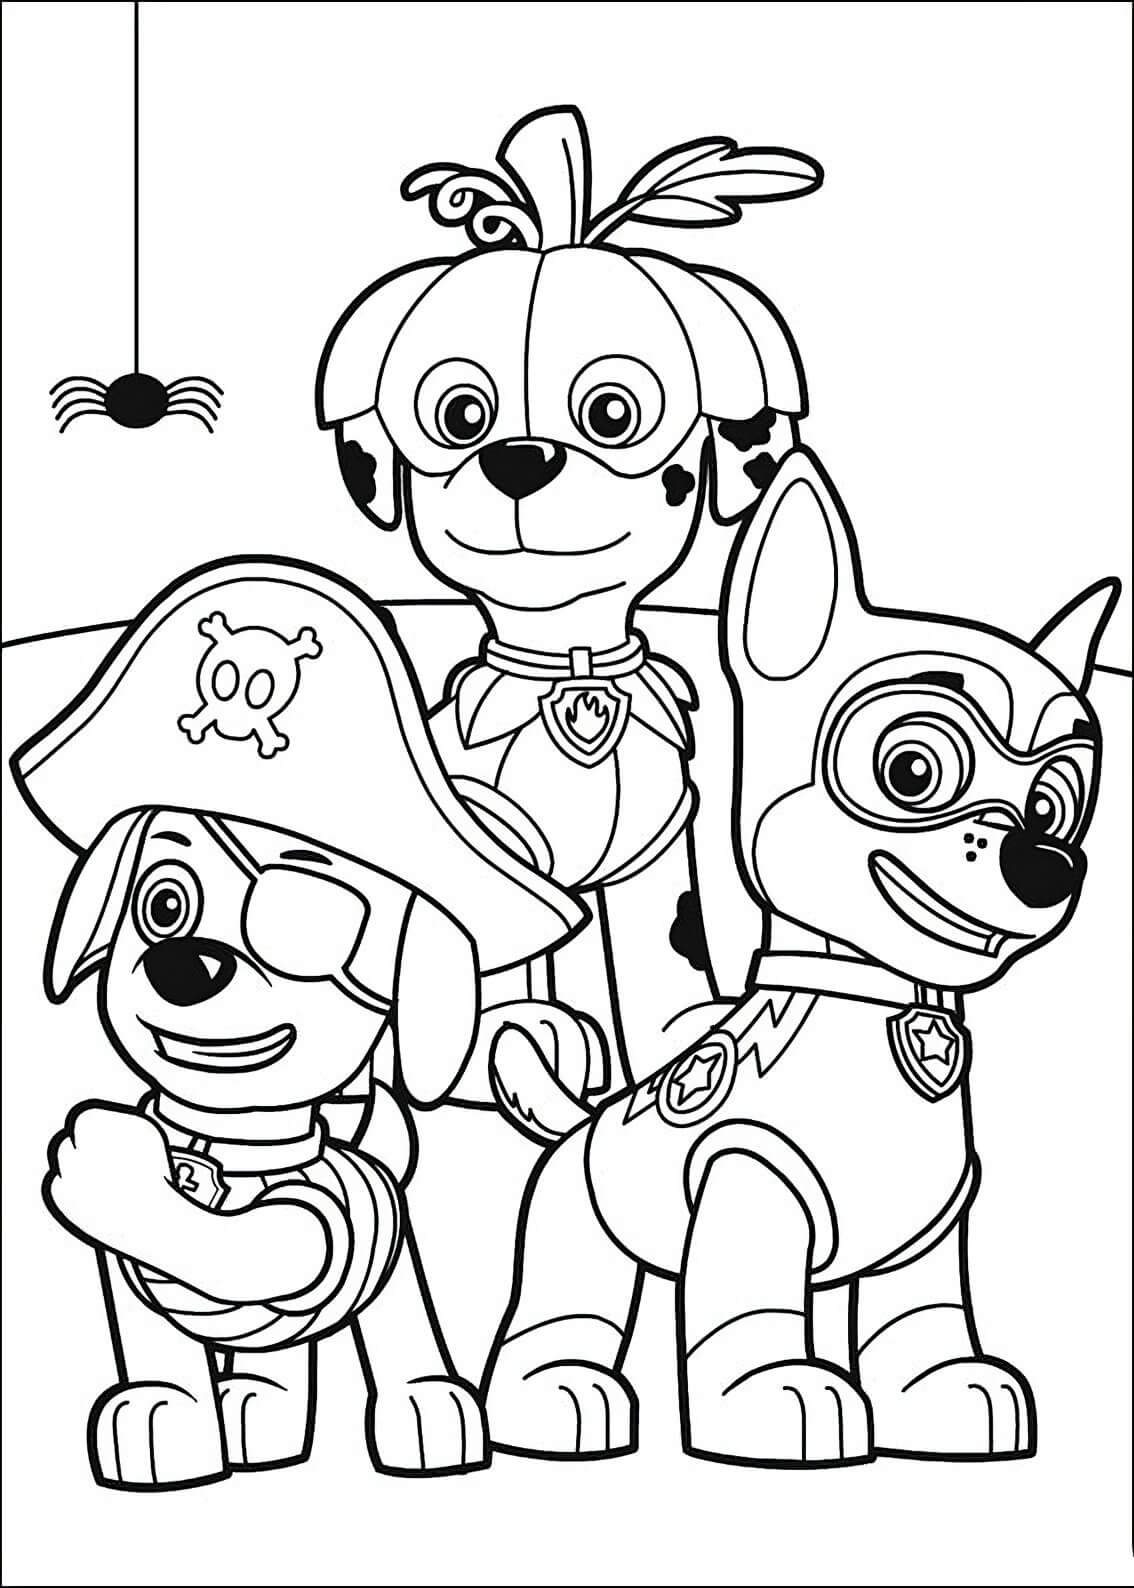 Zuma, Martial, Chase dressed up - Paw Patrol Coloring Pages